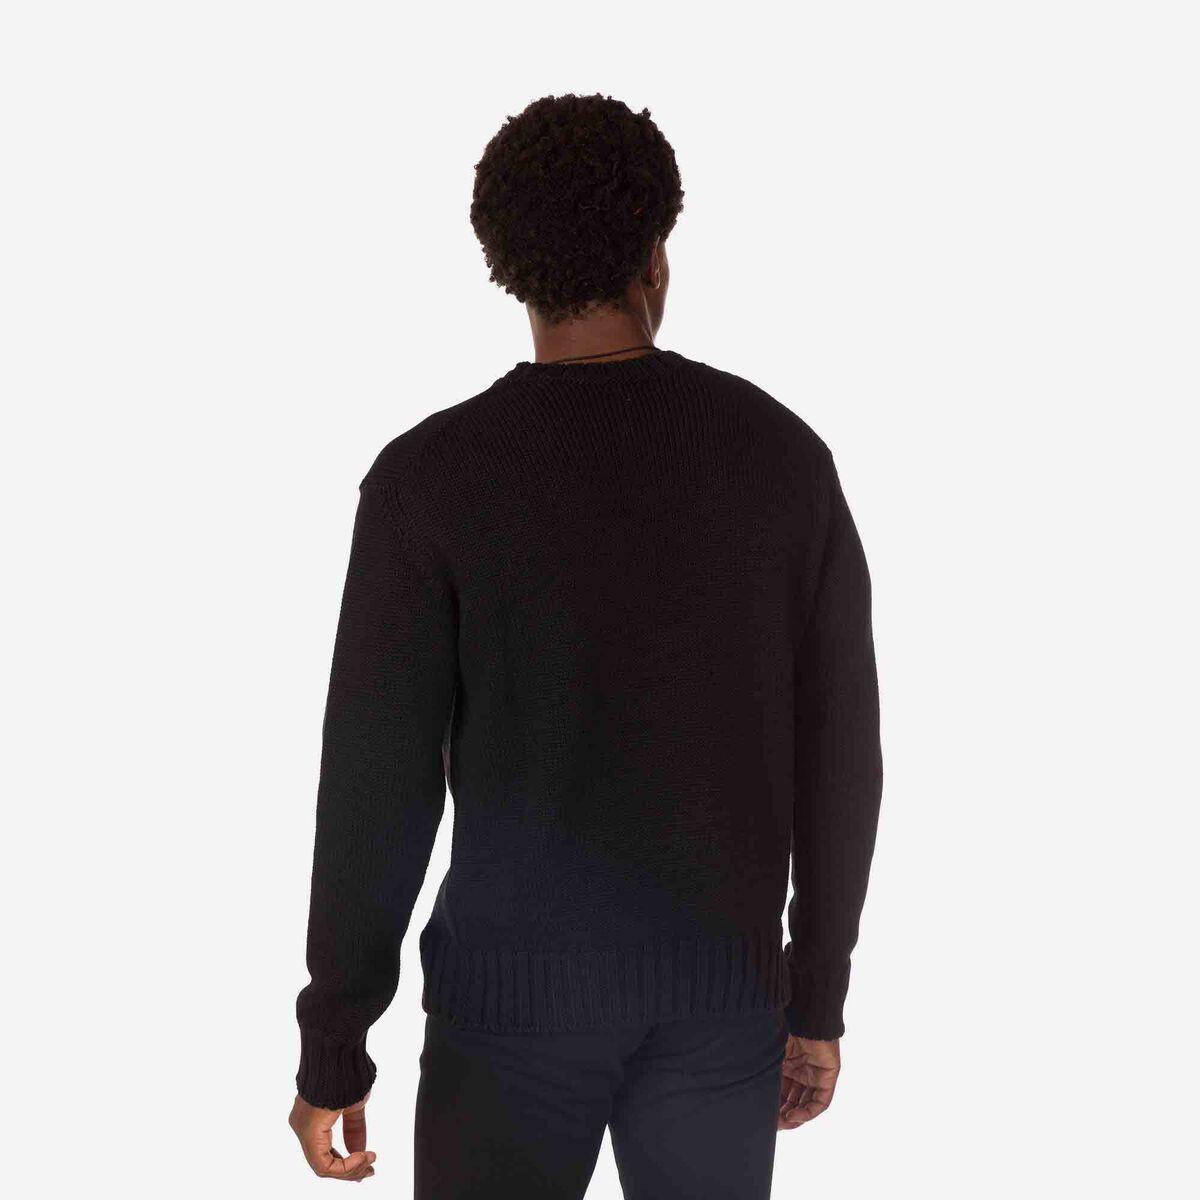 Men's Over Round-Neck Knit Sweater